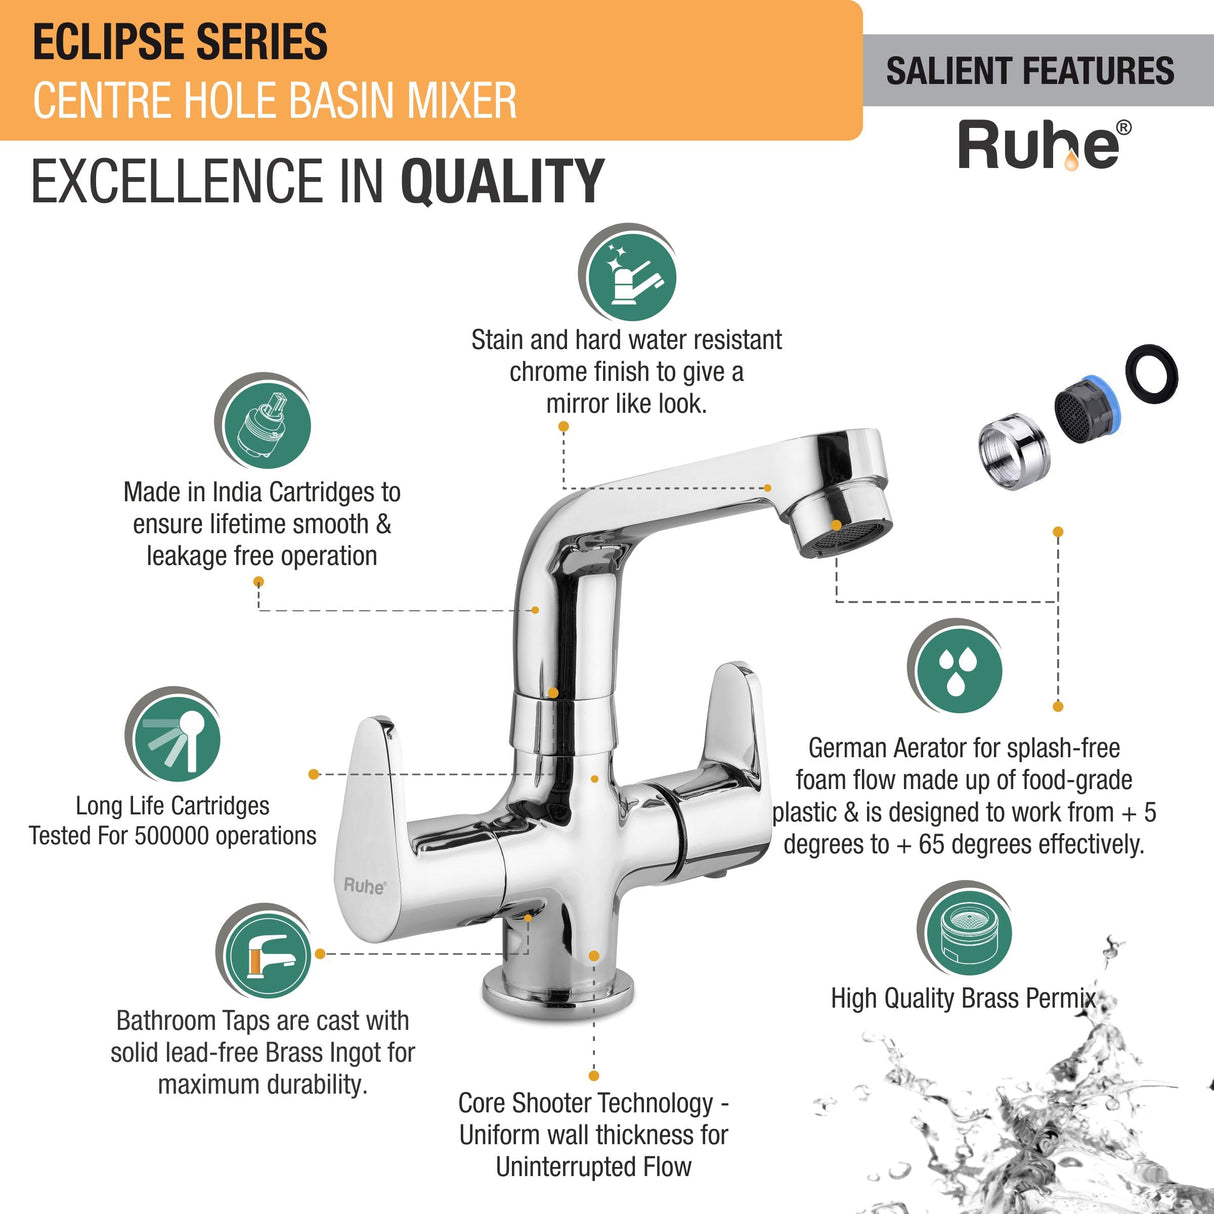 Eclipse Centre Hole Basin Mixer with Small (7 inches) Swivel Spout Faucet features